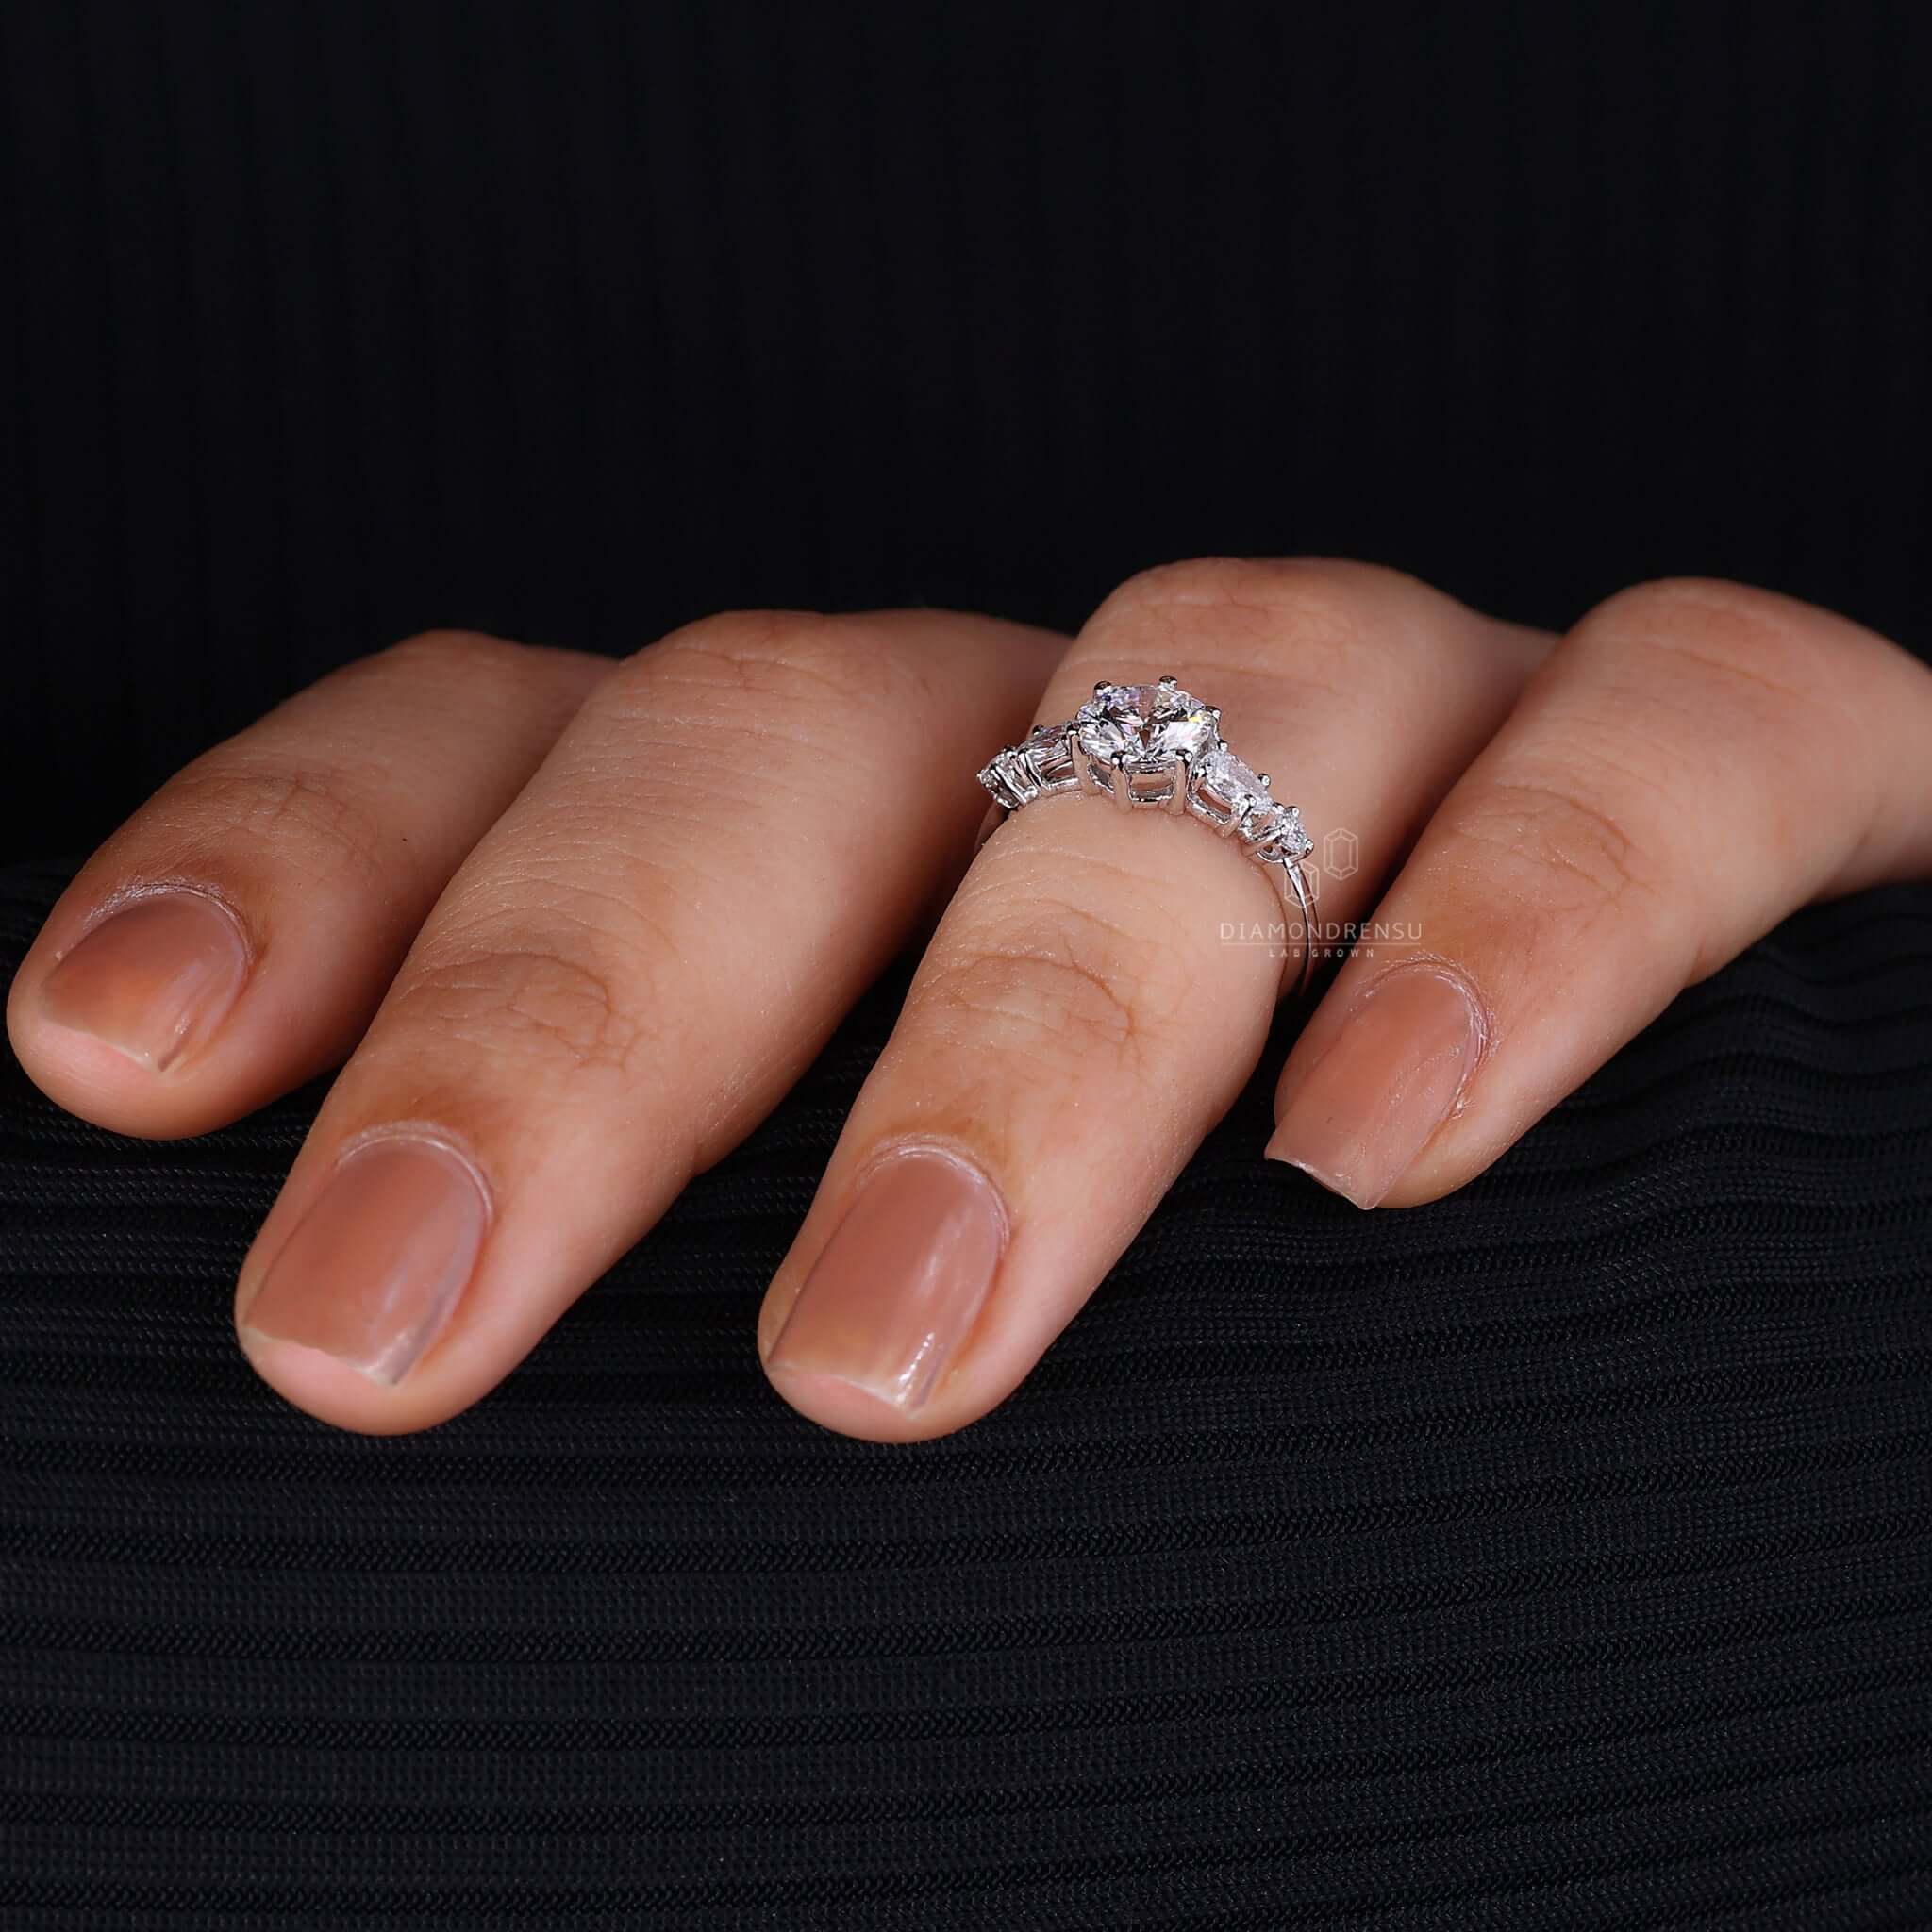 Elegant ring in white gold, placed against a soft background, reflecting luxury and simplicity.